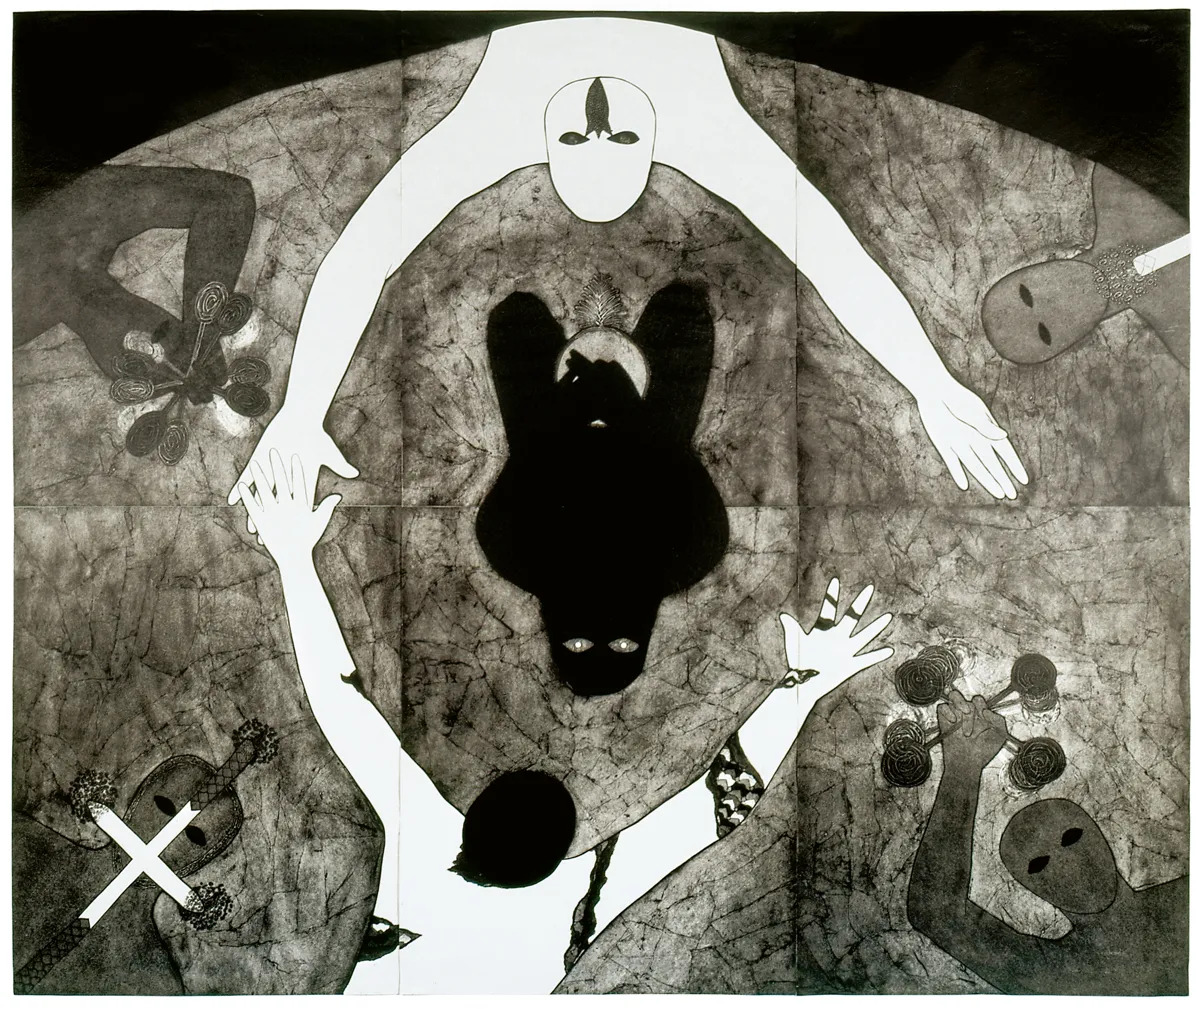 A black-and-white collagraph showing two white figures with arms outstretched around a black figure. There are fourth gray figur